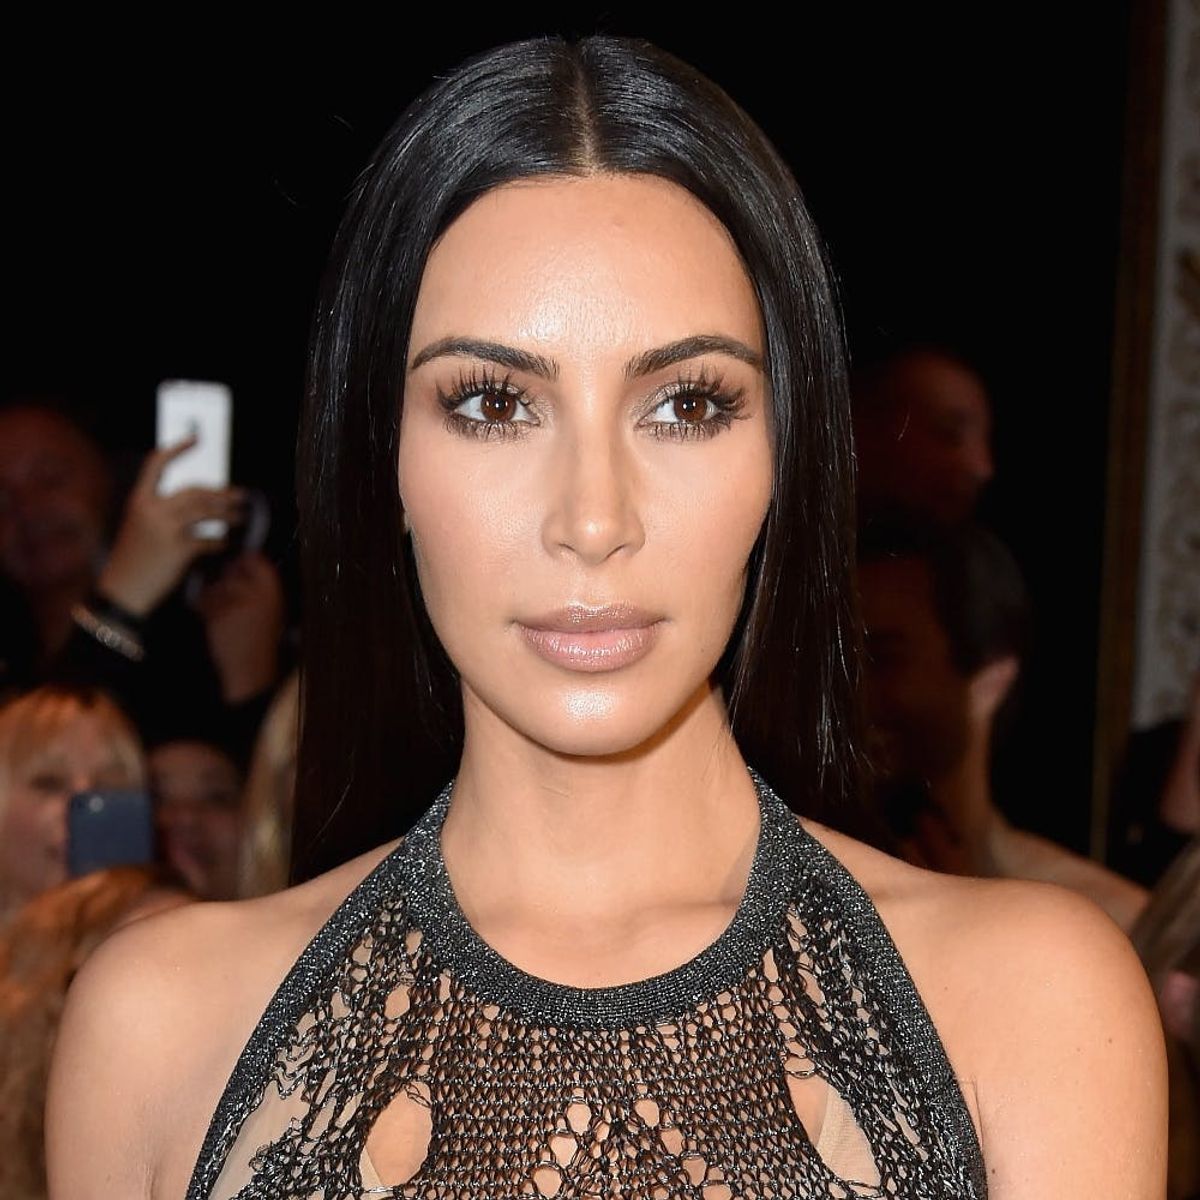 Kim Kardashian Reportedly Stalked by Two Men Days Before Robbery